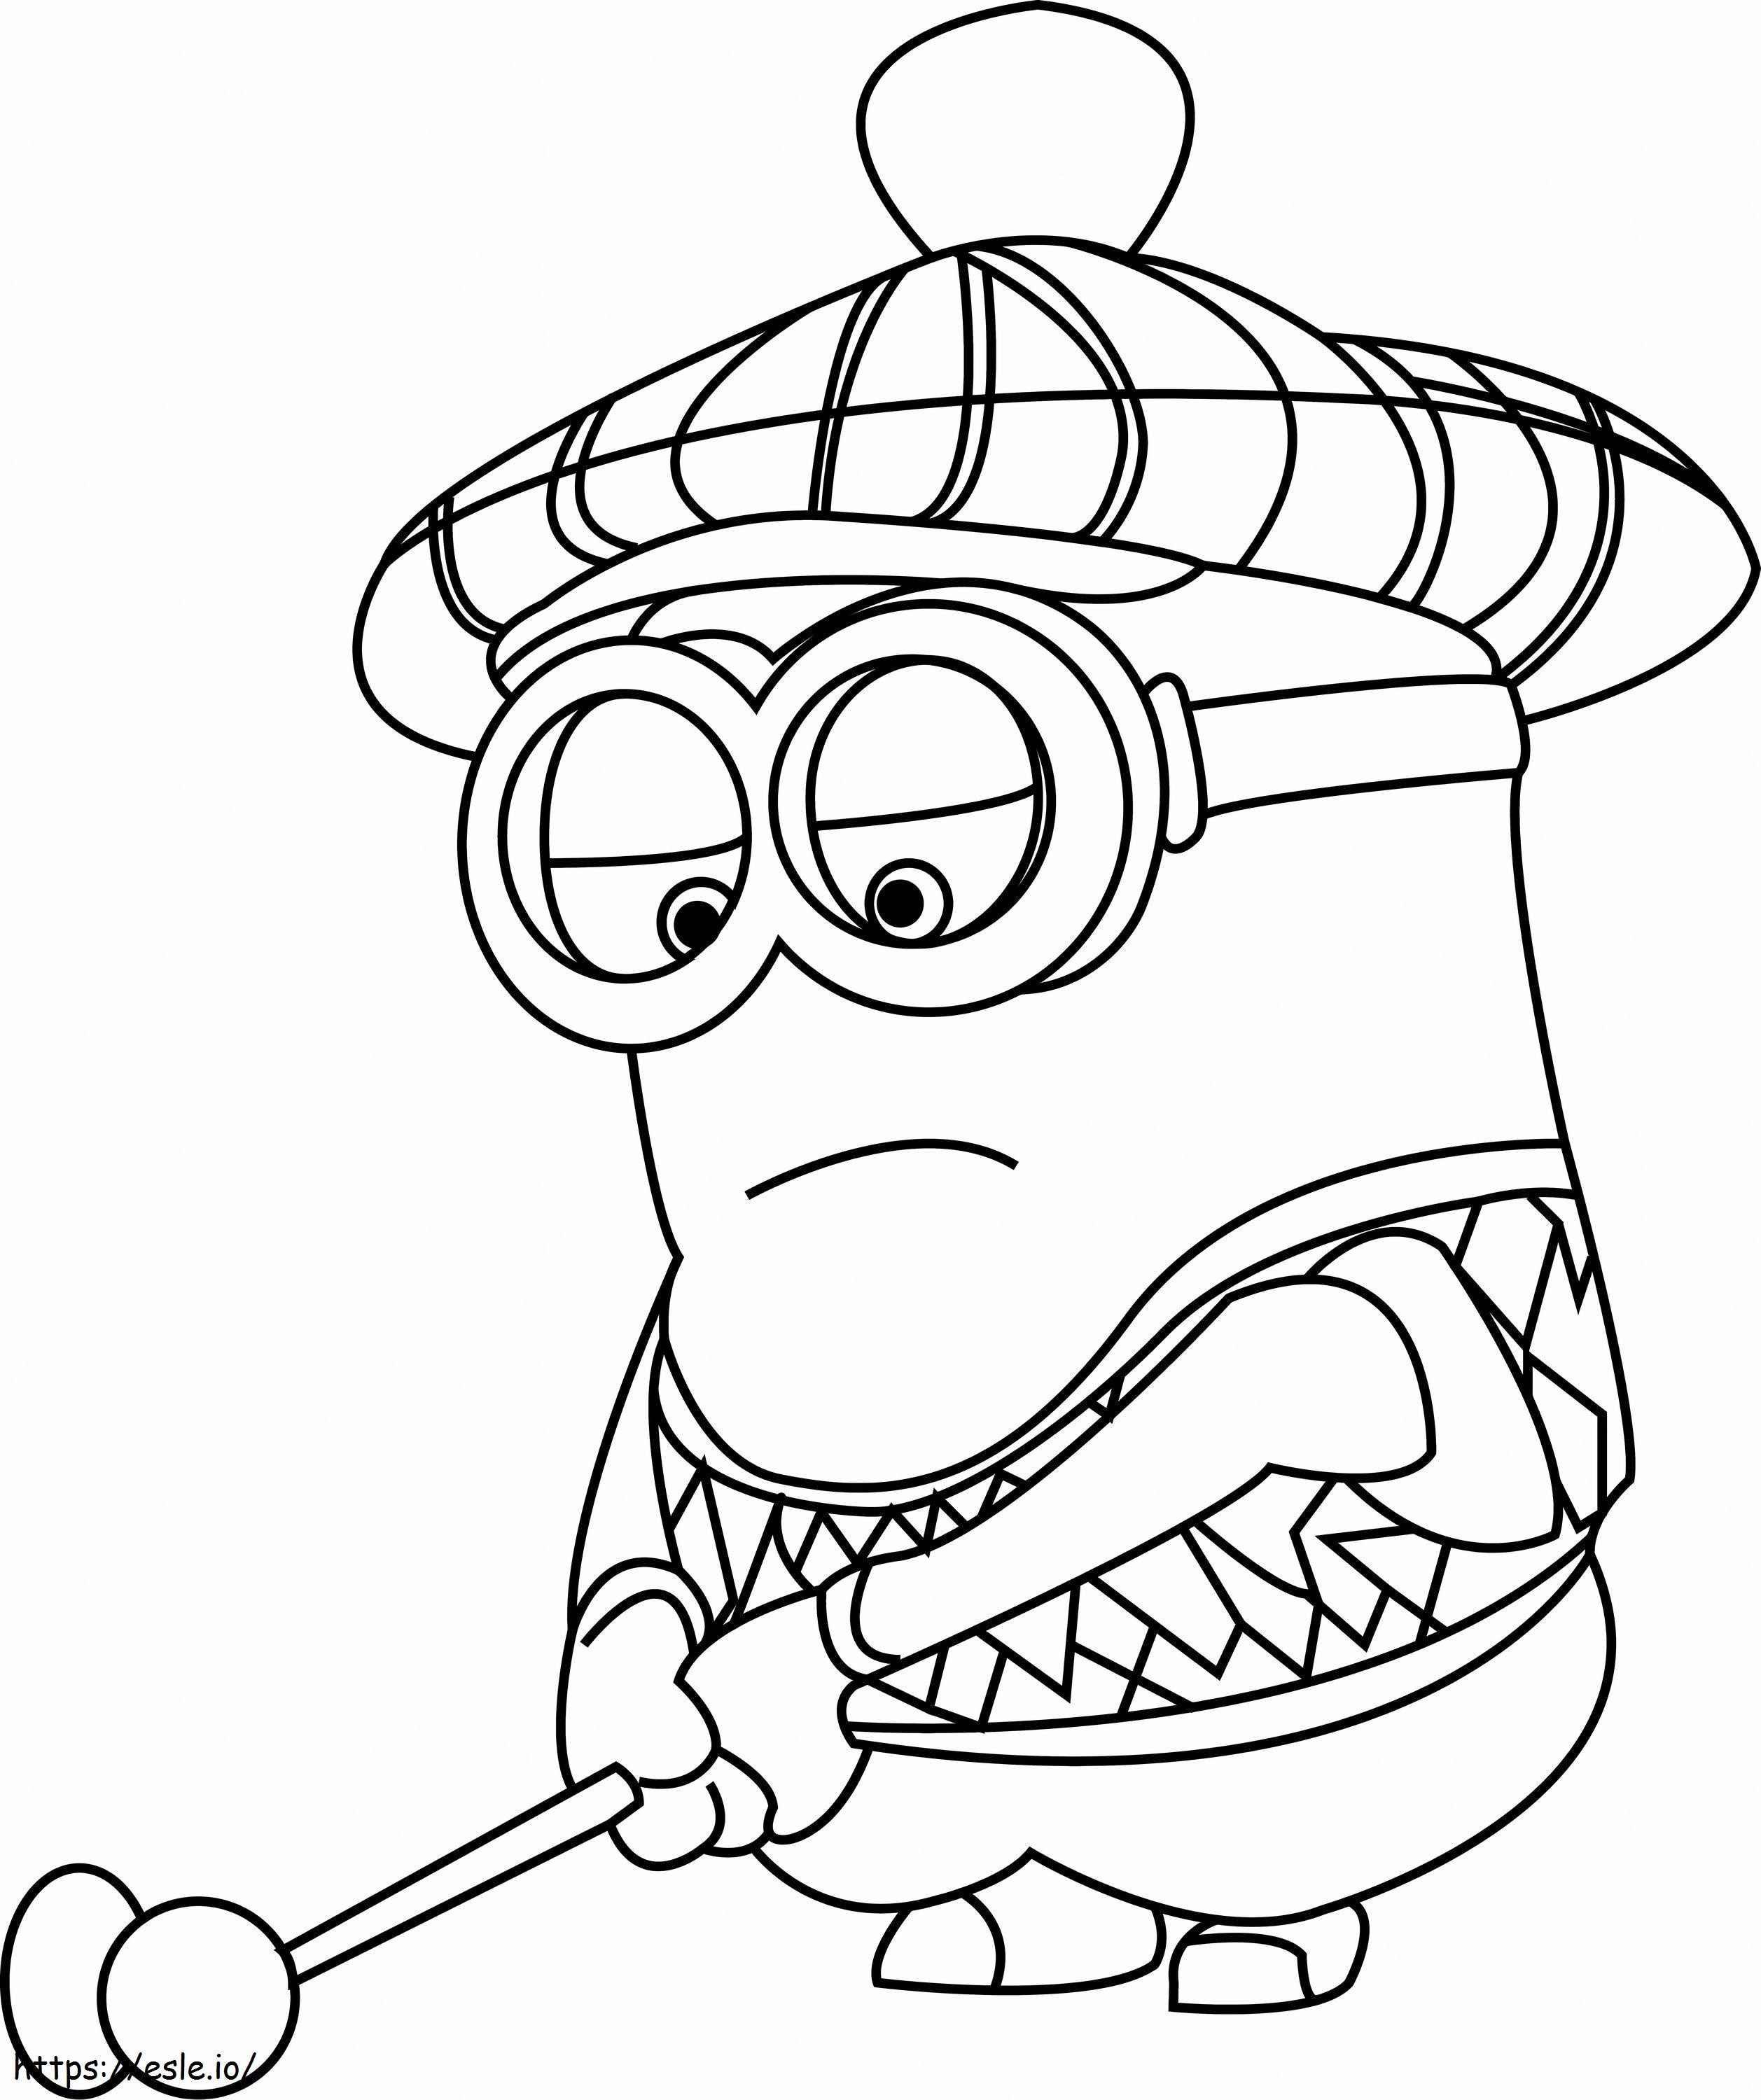 Minion Kevin Playing Golf A4 coloring page